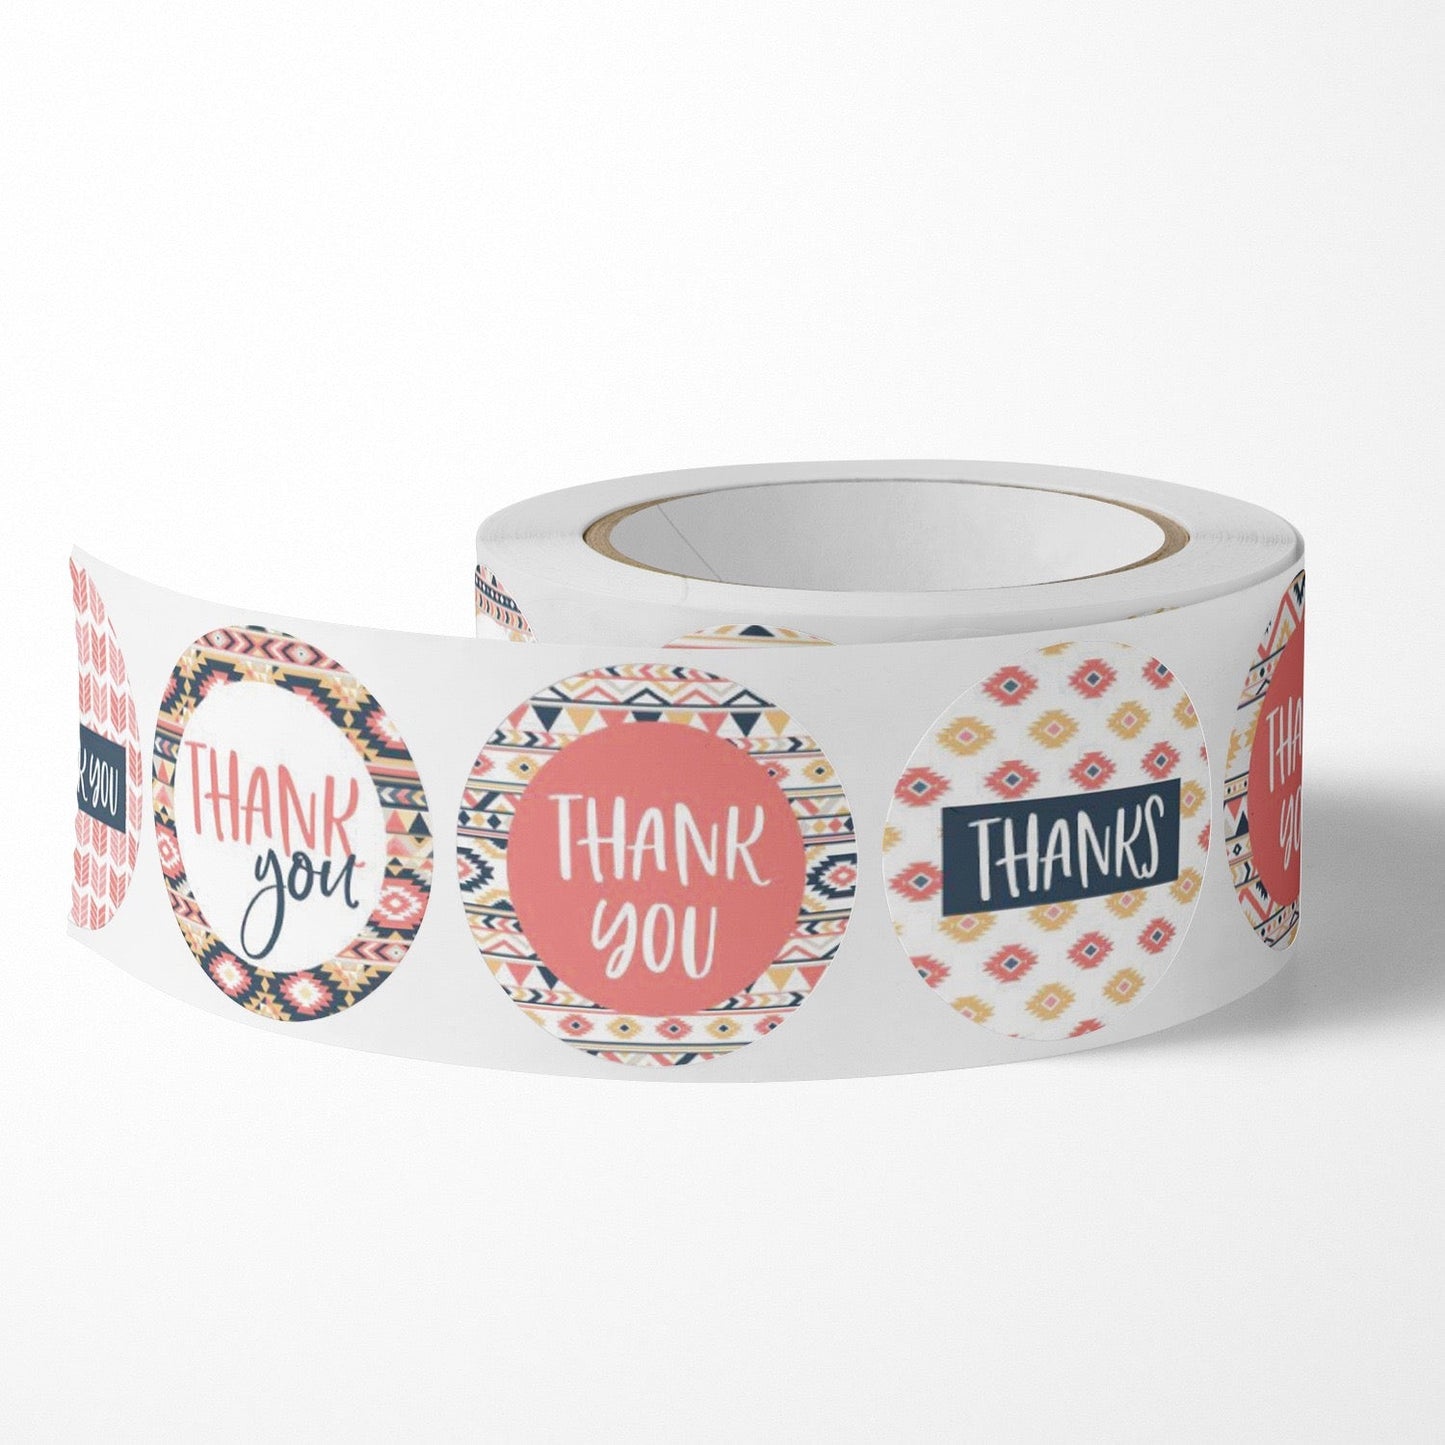 Thank you 200 Pcs Stickers Washi Tape Roll